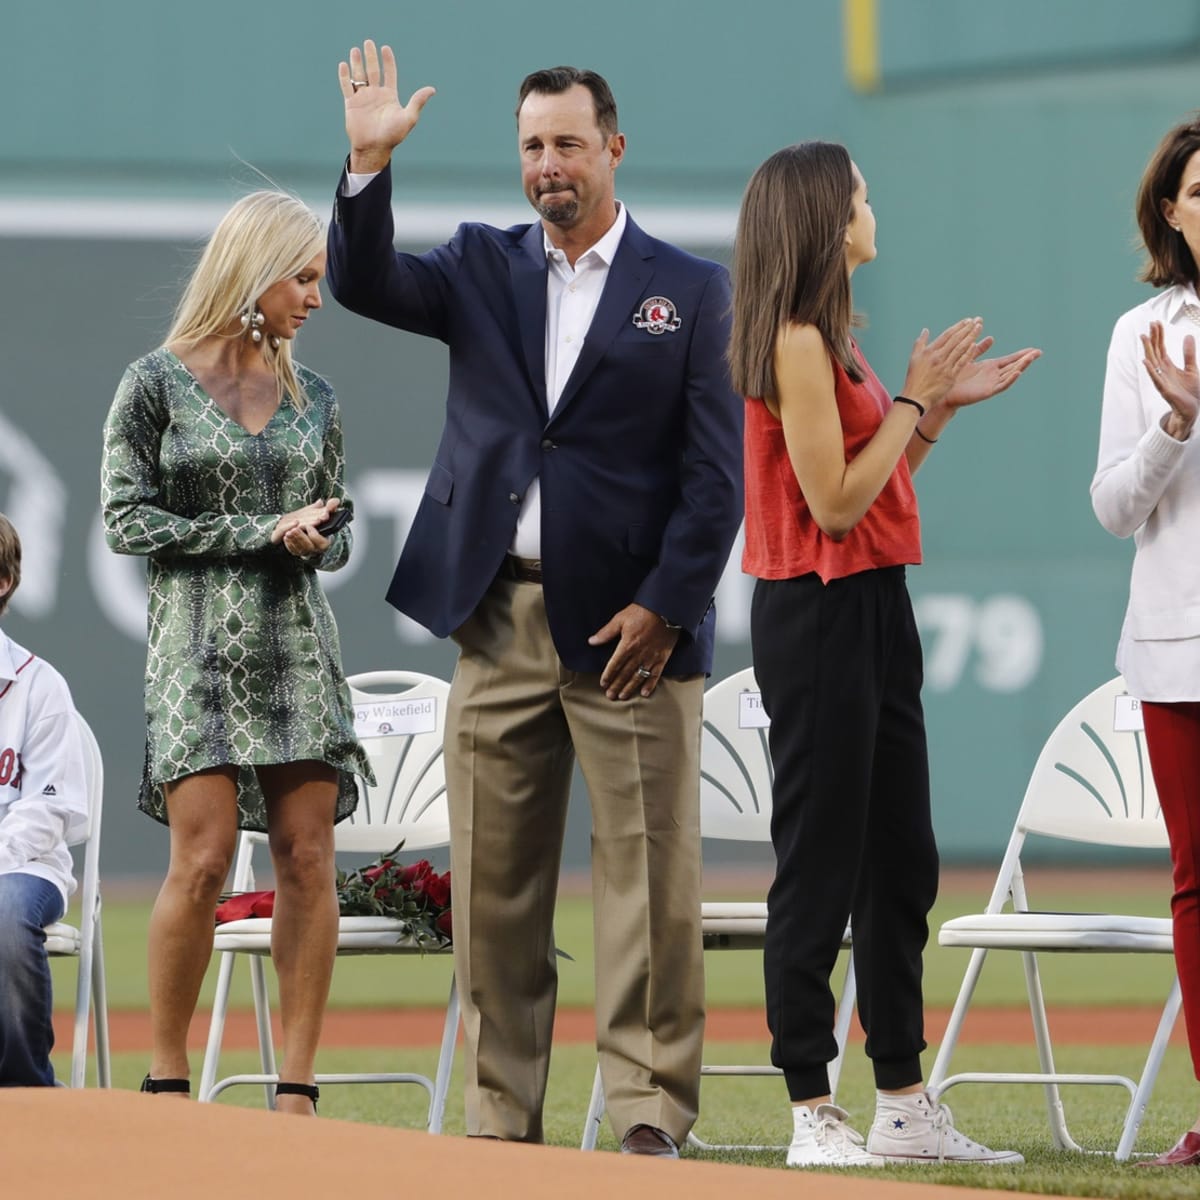 Longtime Boston Red Sox pitcher Tim Wakefield died Sunday morning